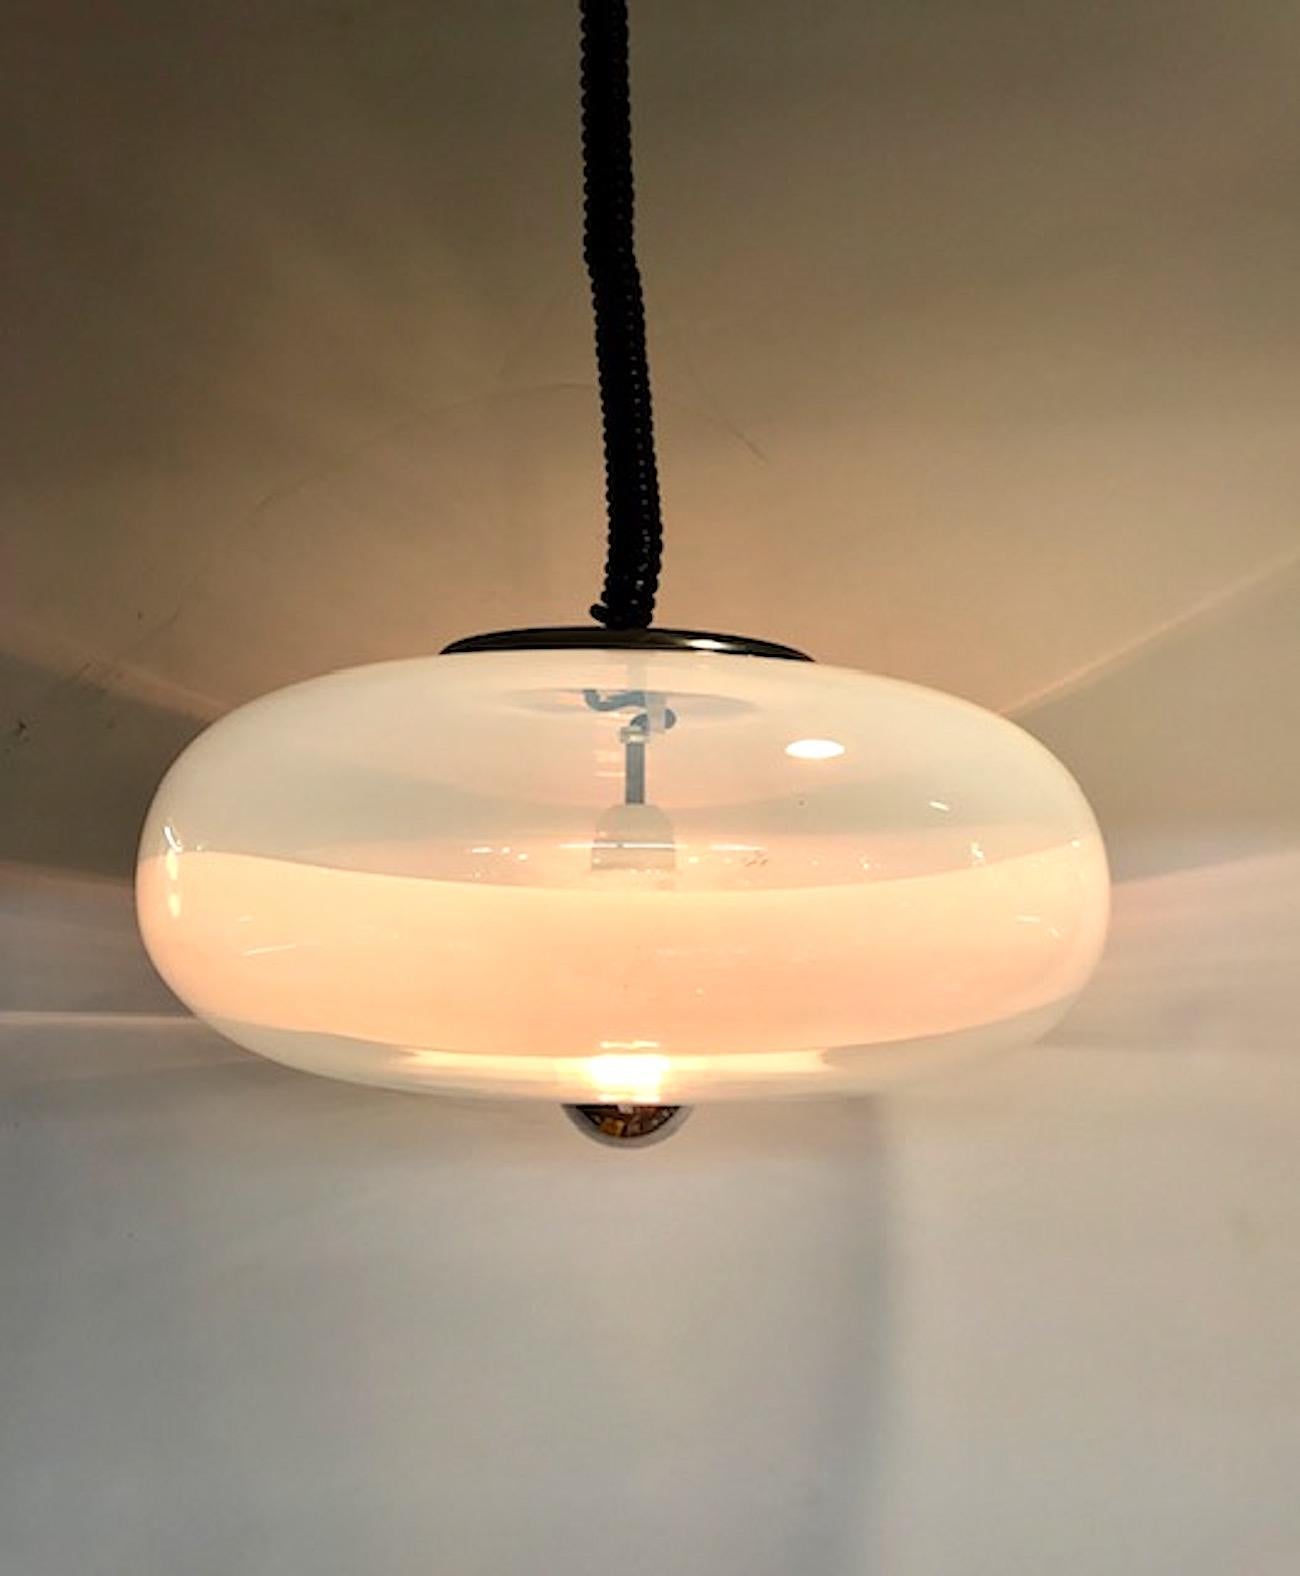 Murano glass bubble pendant light, circa 1970, in the style of Italian lighting company Sothis. The hand blown glass shade is pale translucent white opaline with transparent white stripe. The bottom centre of the donut shade has a standard socket